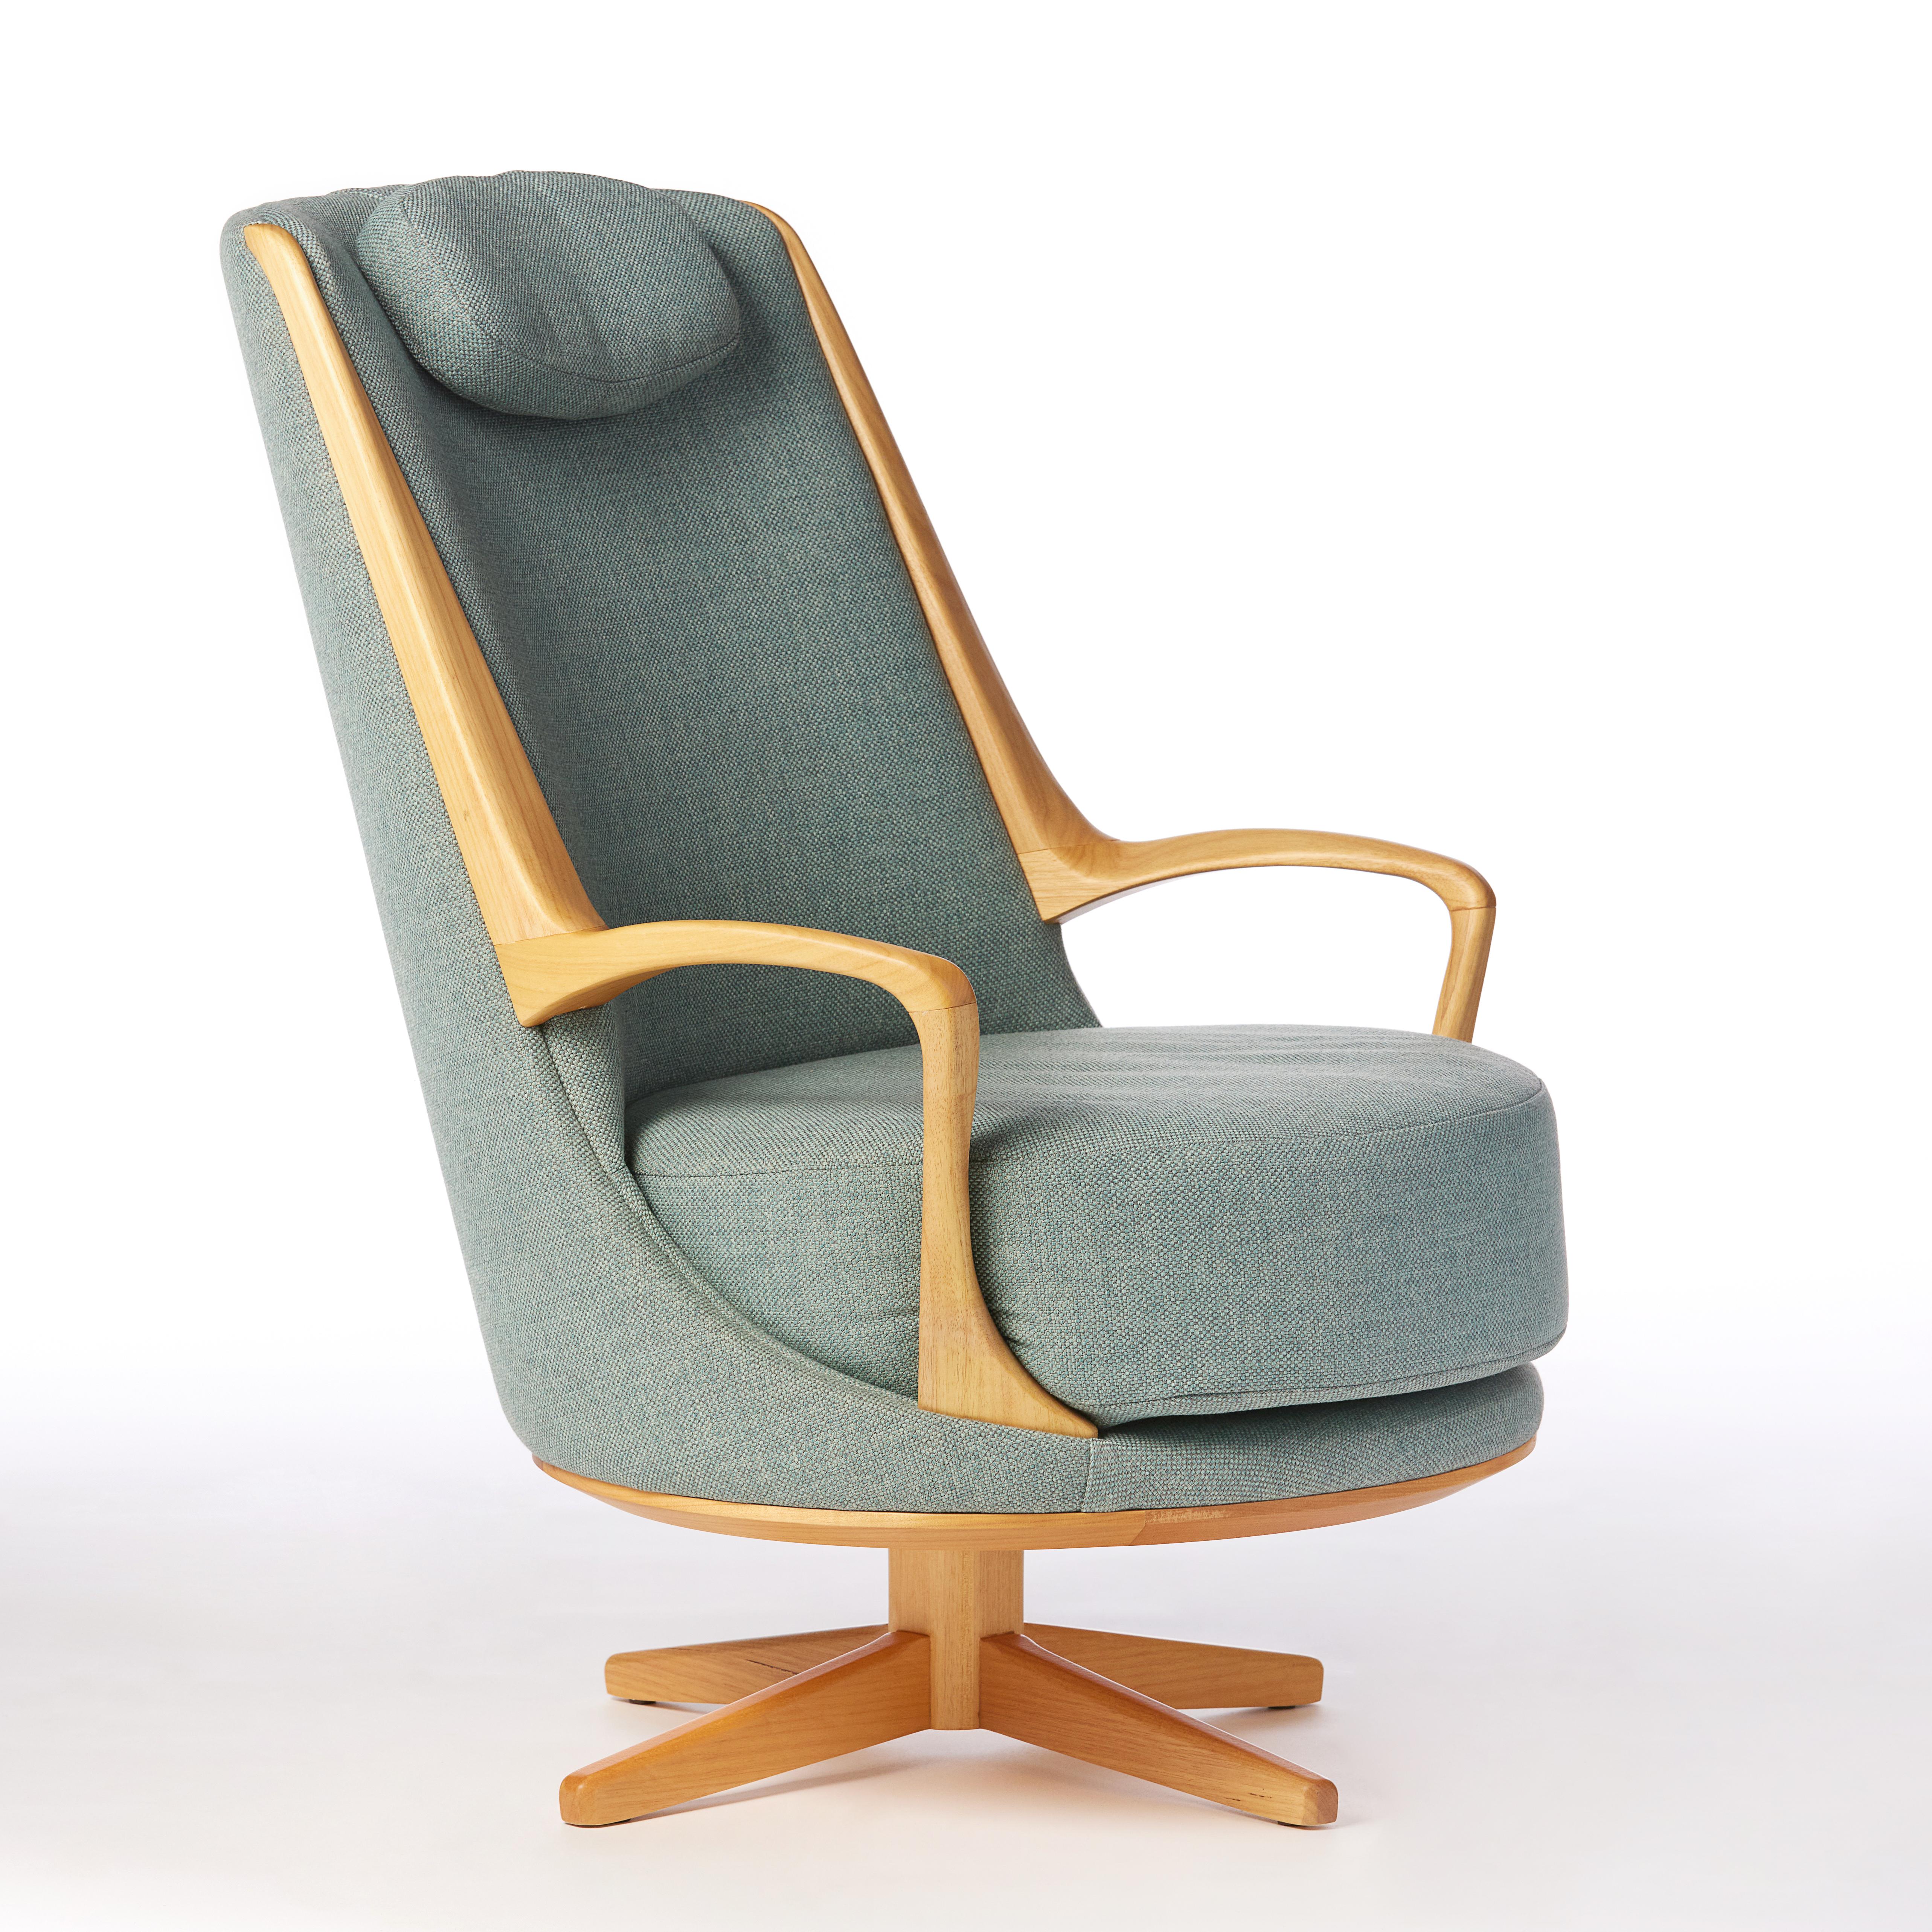 Modern Brazilian Armchair in Solid Wood, Textiles or Leathers In New Condition For Sale In Vila Cordeiro, São Paulo